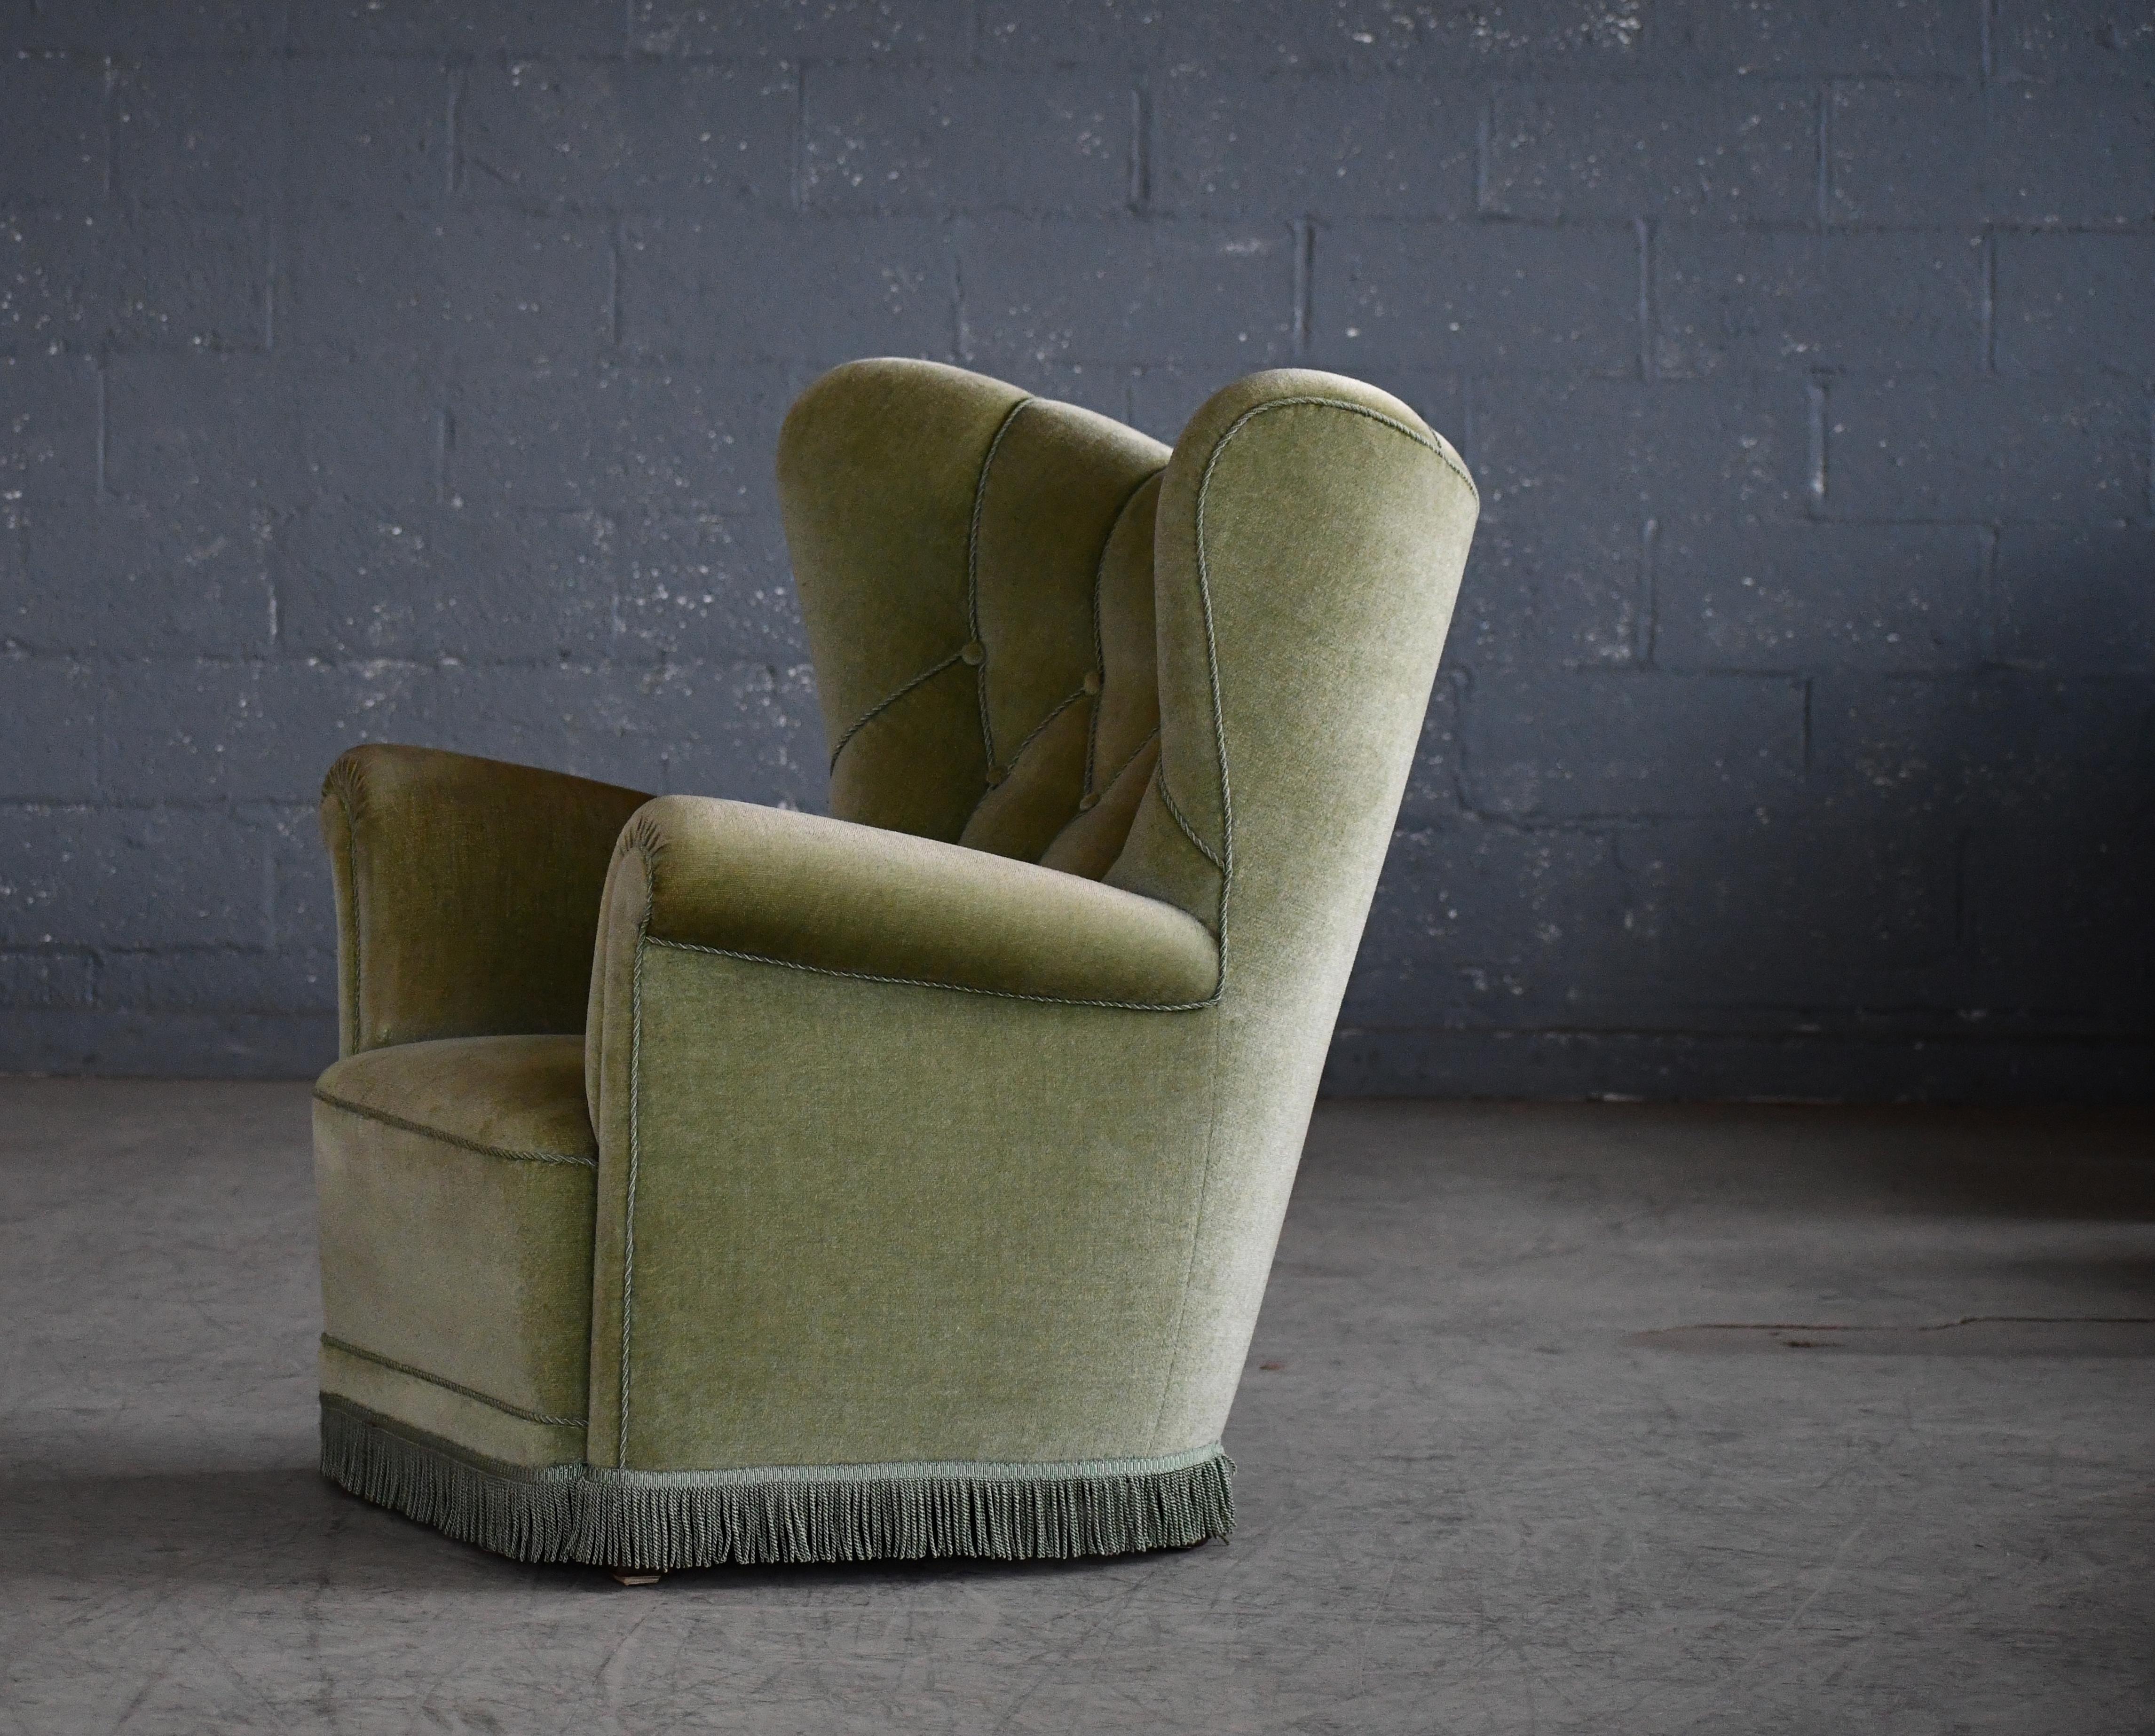 Danish Mid-Century Lounge or Club Chair in Green Mohair, 1940's For Sale 3